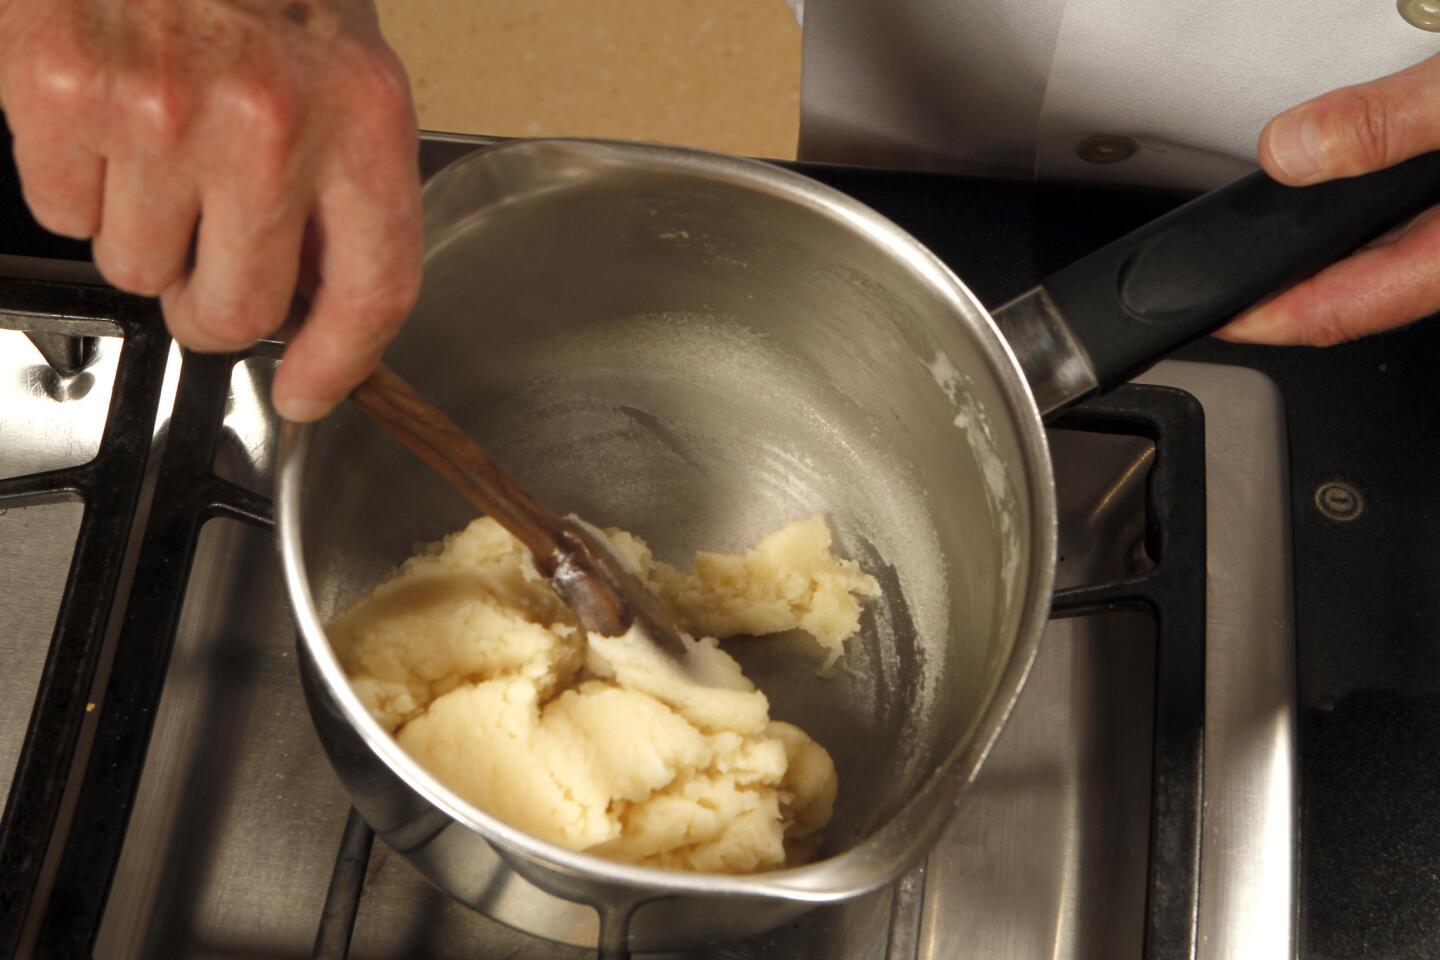 Beat in the flour to make a stiff paste.